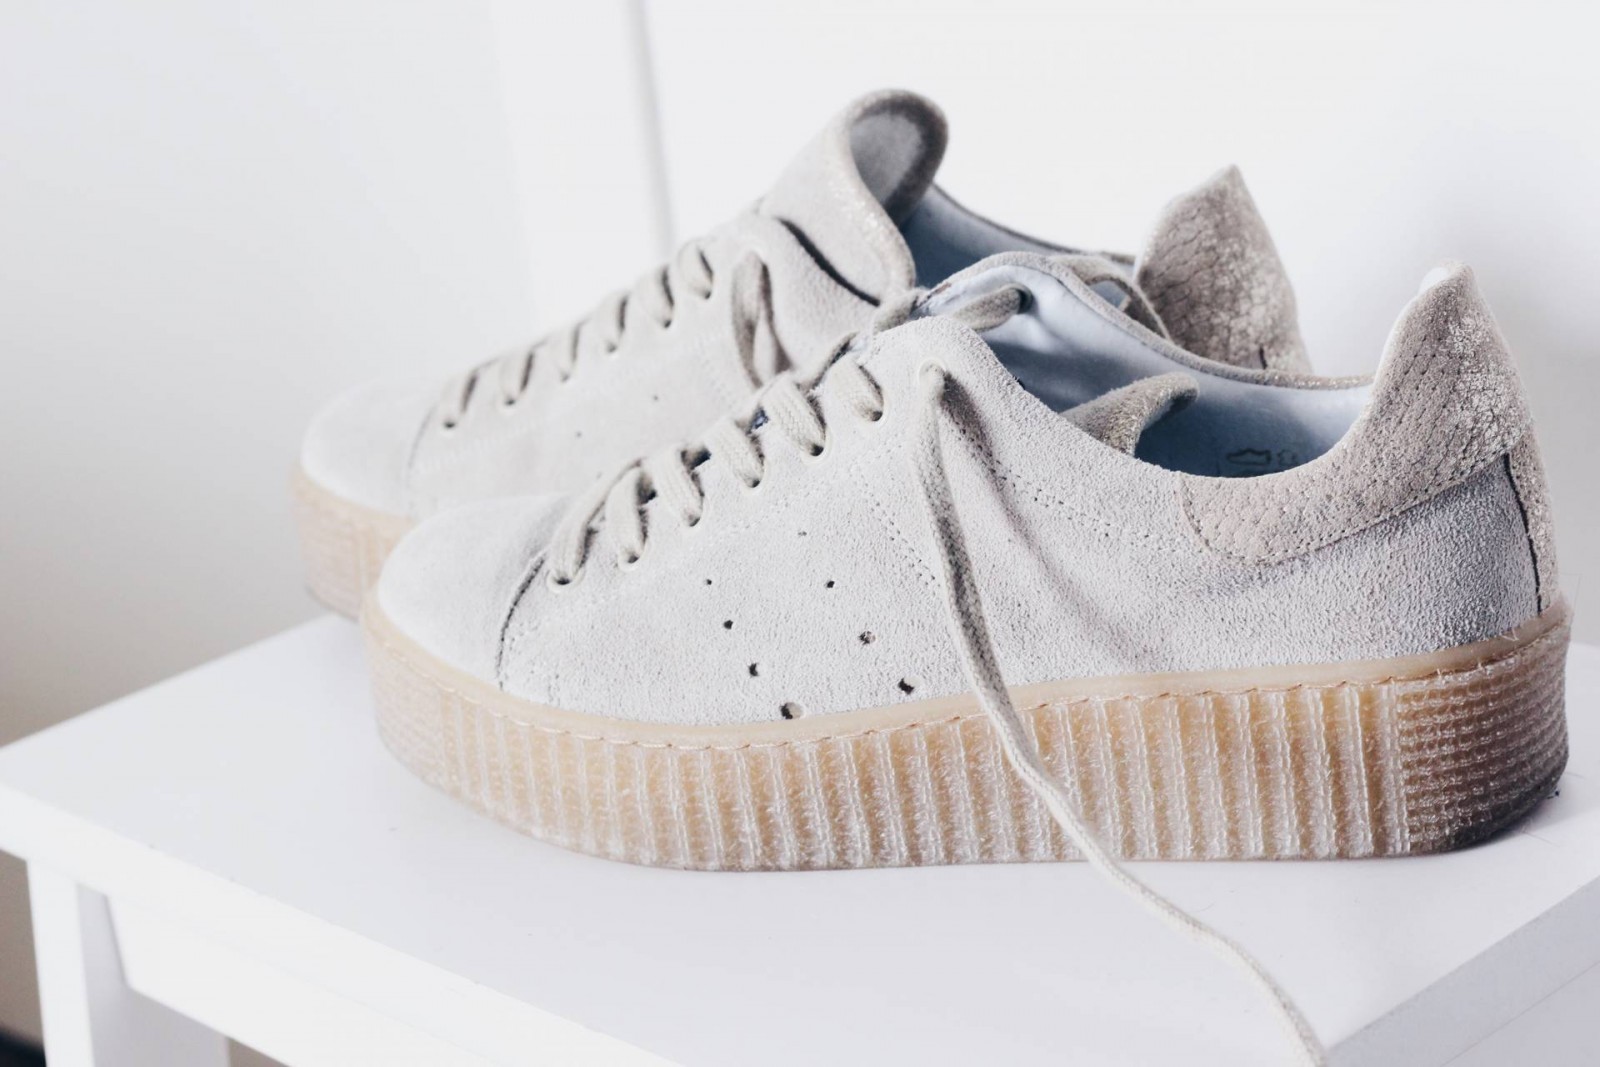 kaping Bully Kano New in: Look-a-like Rihanna for Puma creepers - OurFavourites